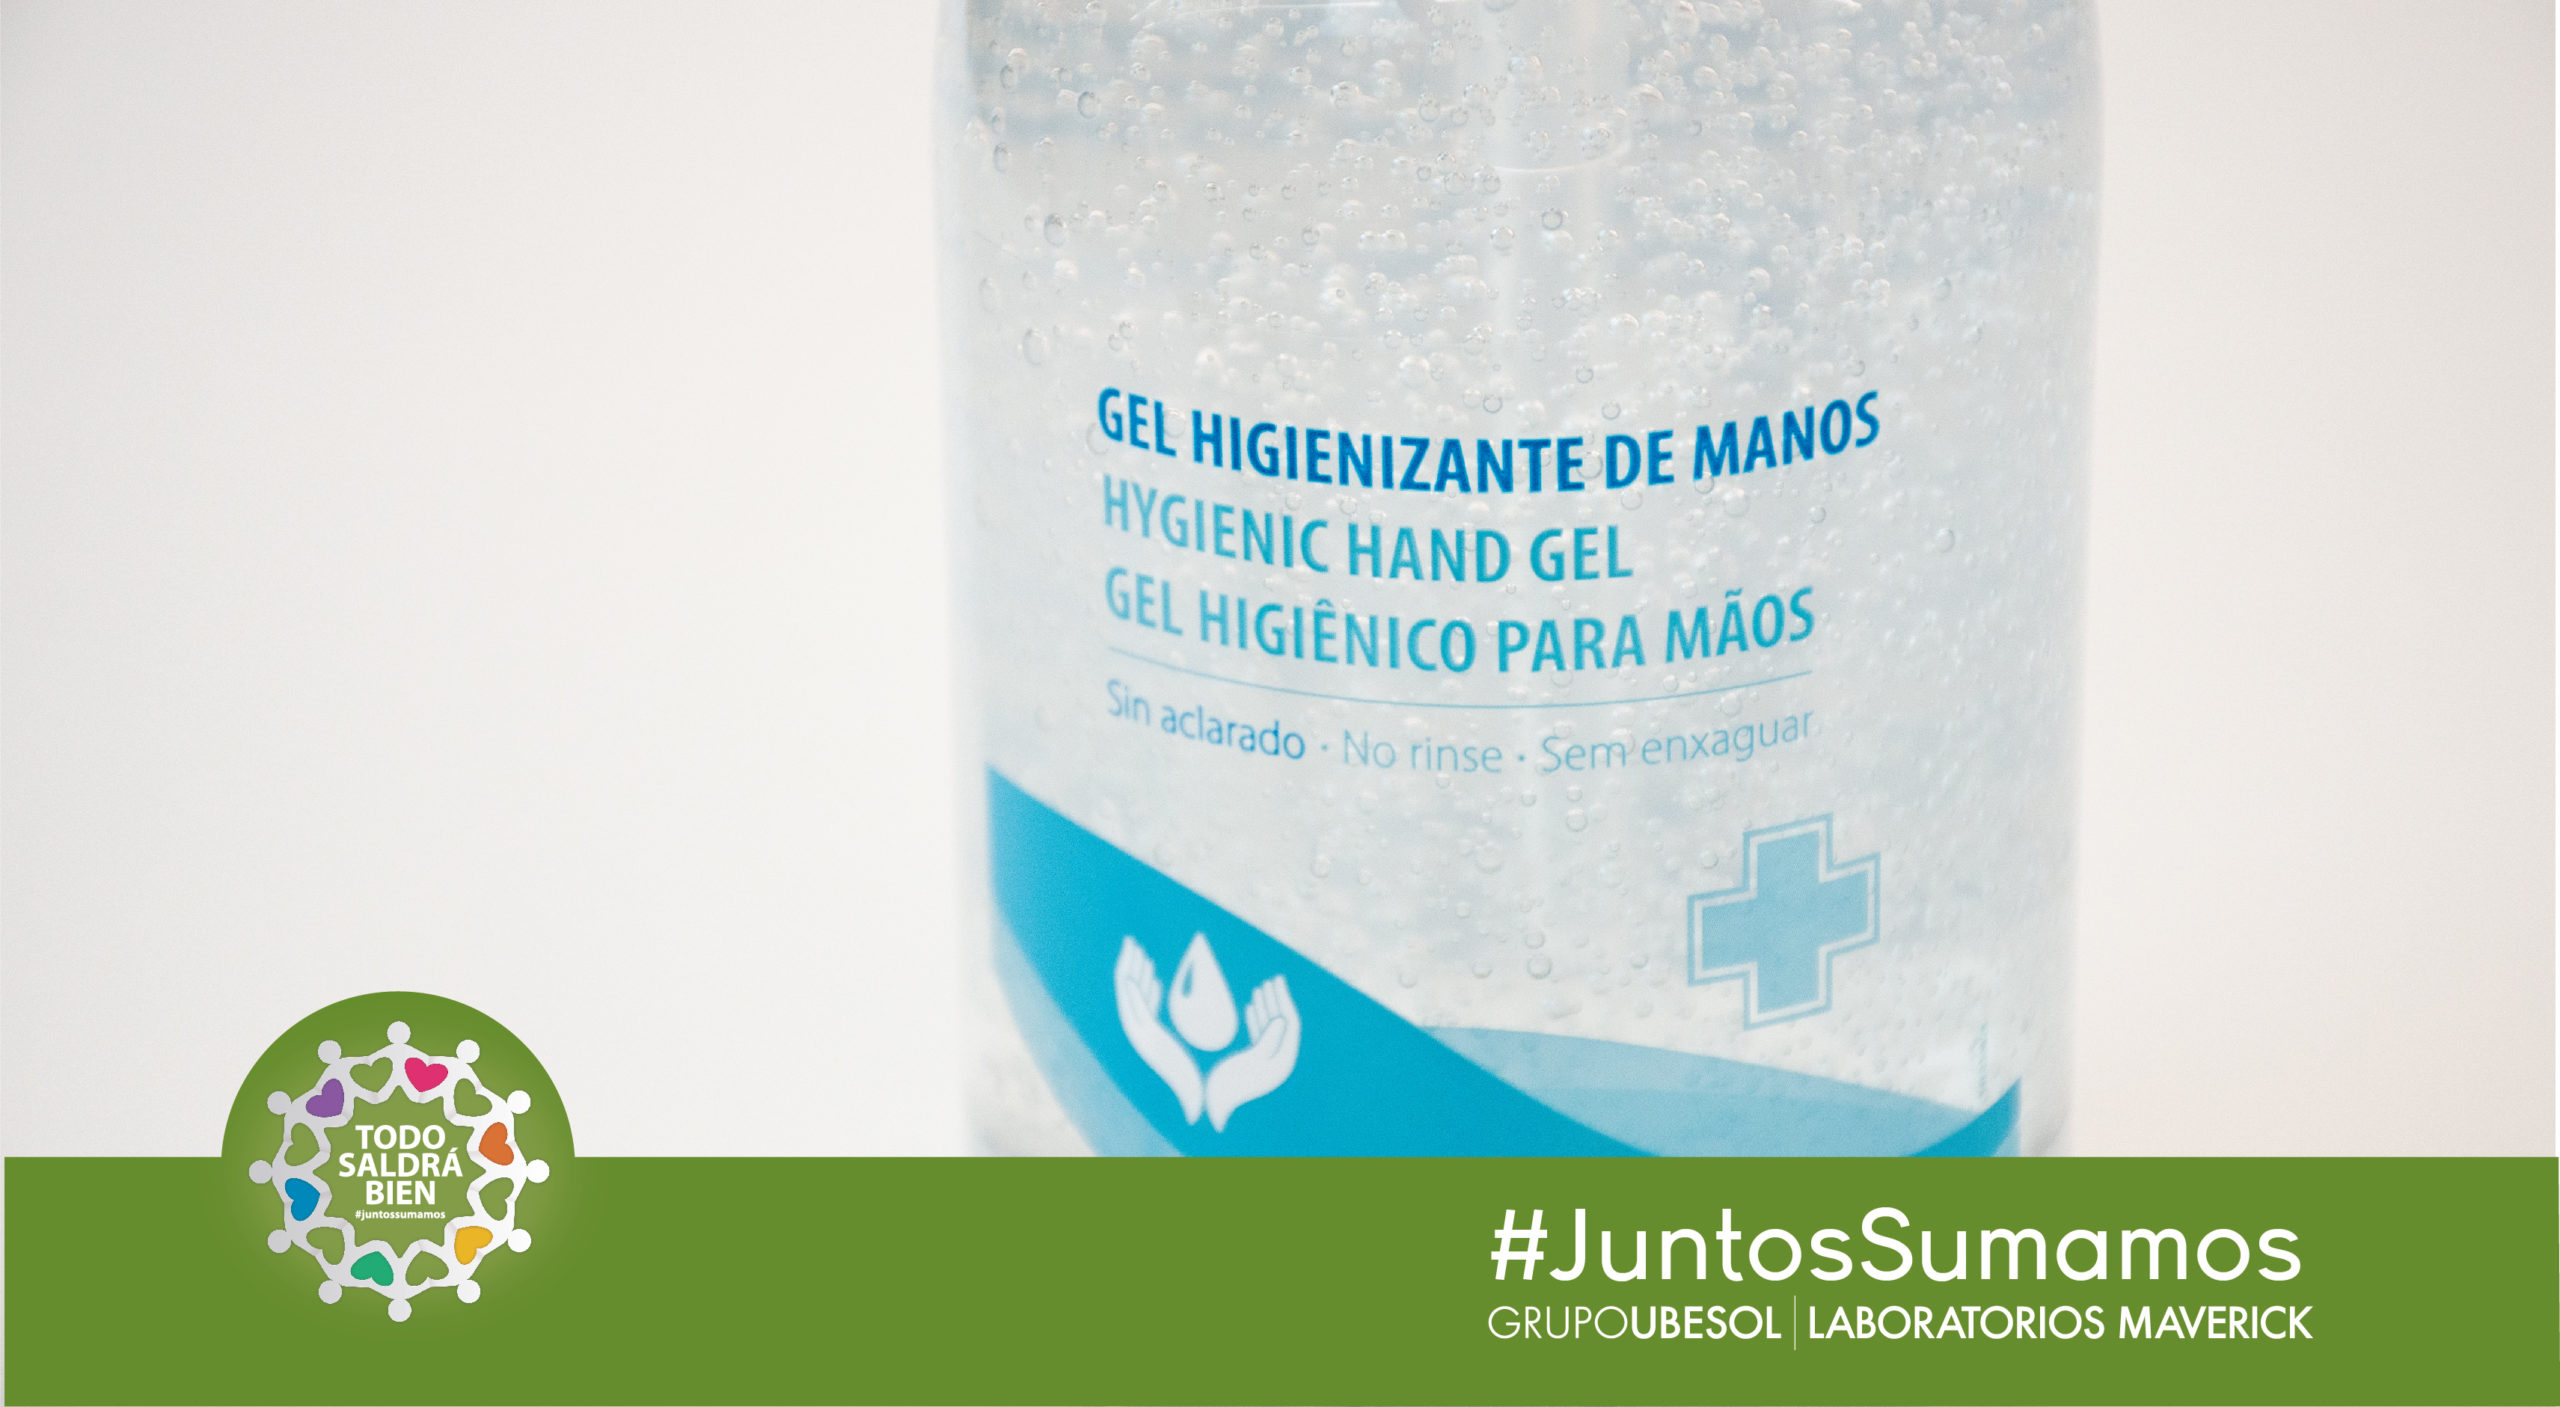 500.000 Hand Sanitisers for the whole of Spain